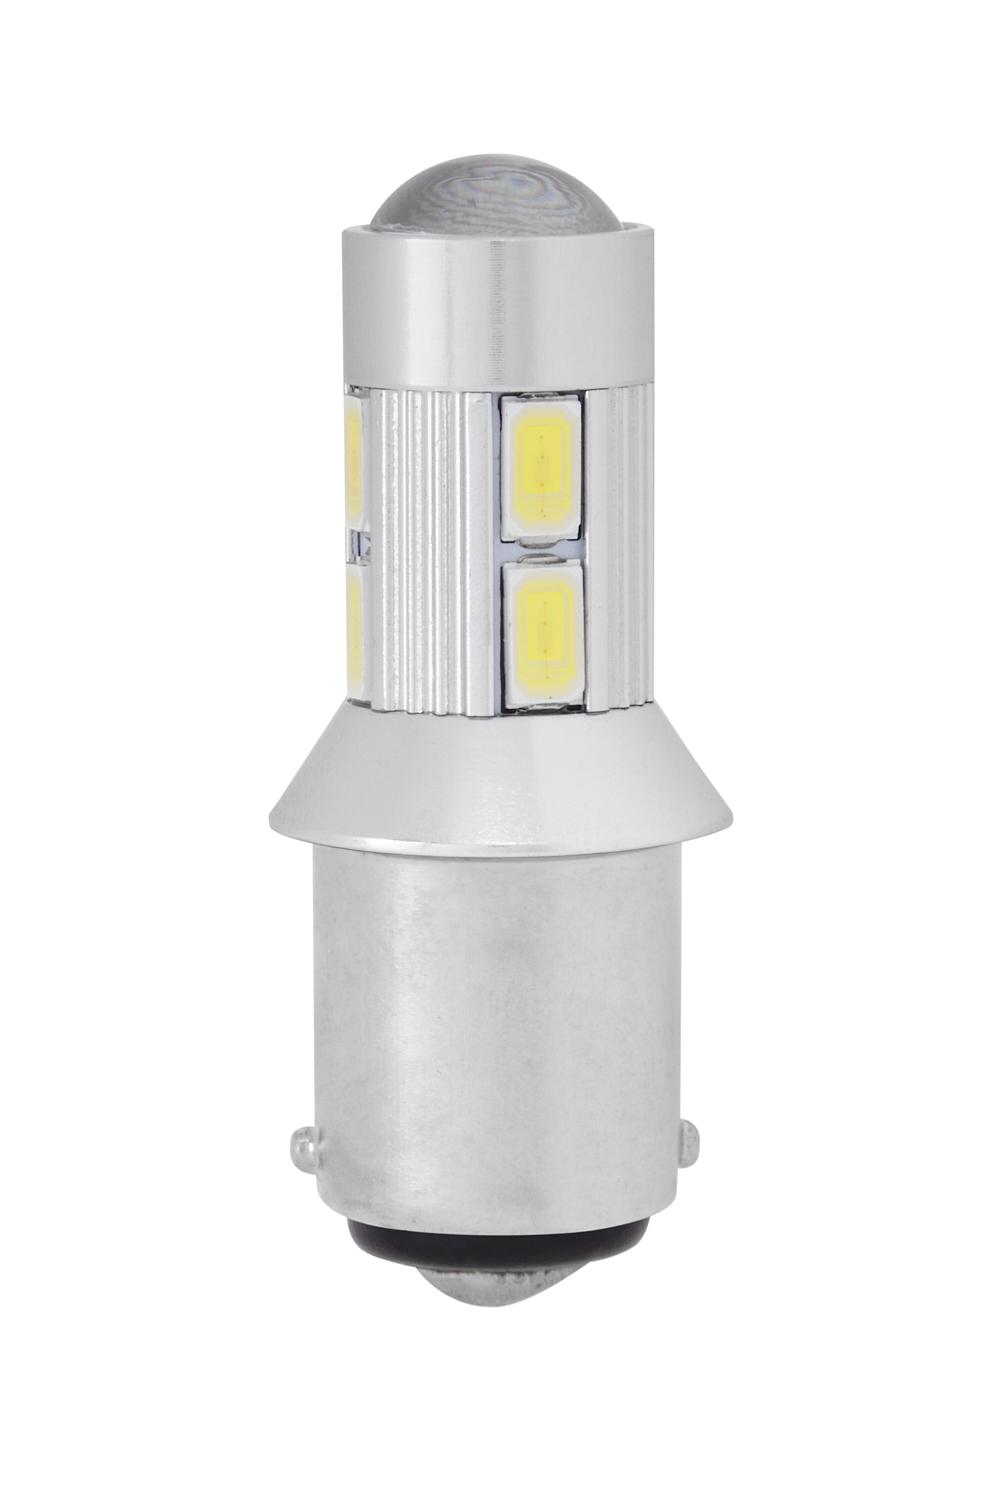 https://www.ringautomotive.com/files/myimages/product/Bulbs/RB1506LED_PRODUCT_001_LR.jpg